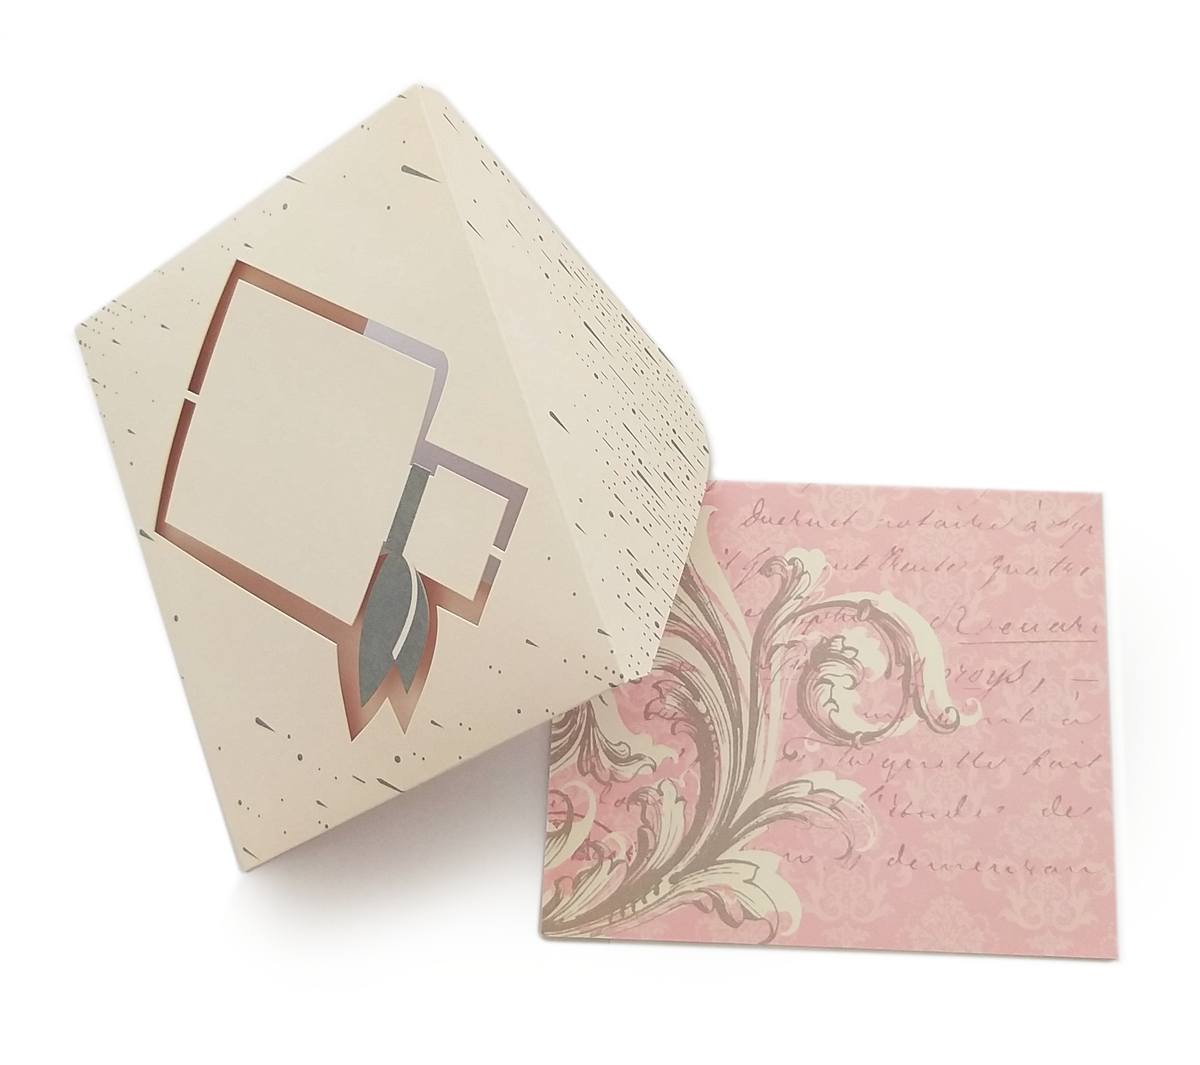 Homemade envelope design, perfumed,  made of recycled paper. Retro delicate style, for weddings ,birthdays or as a lovely card for every occasion